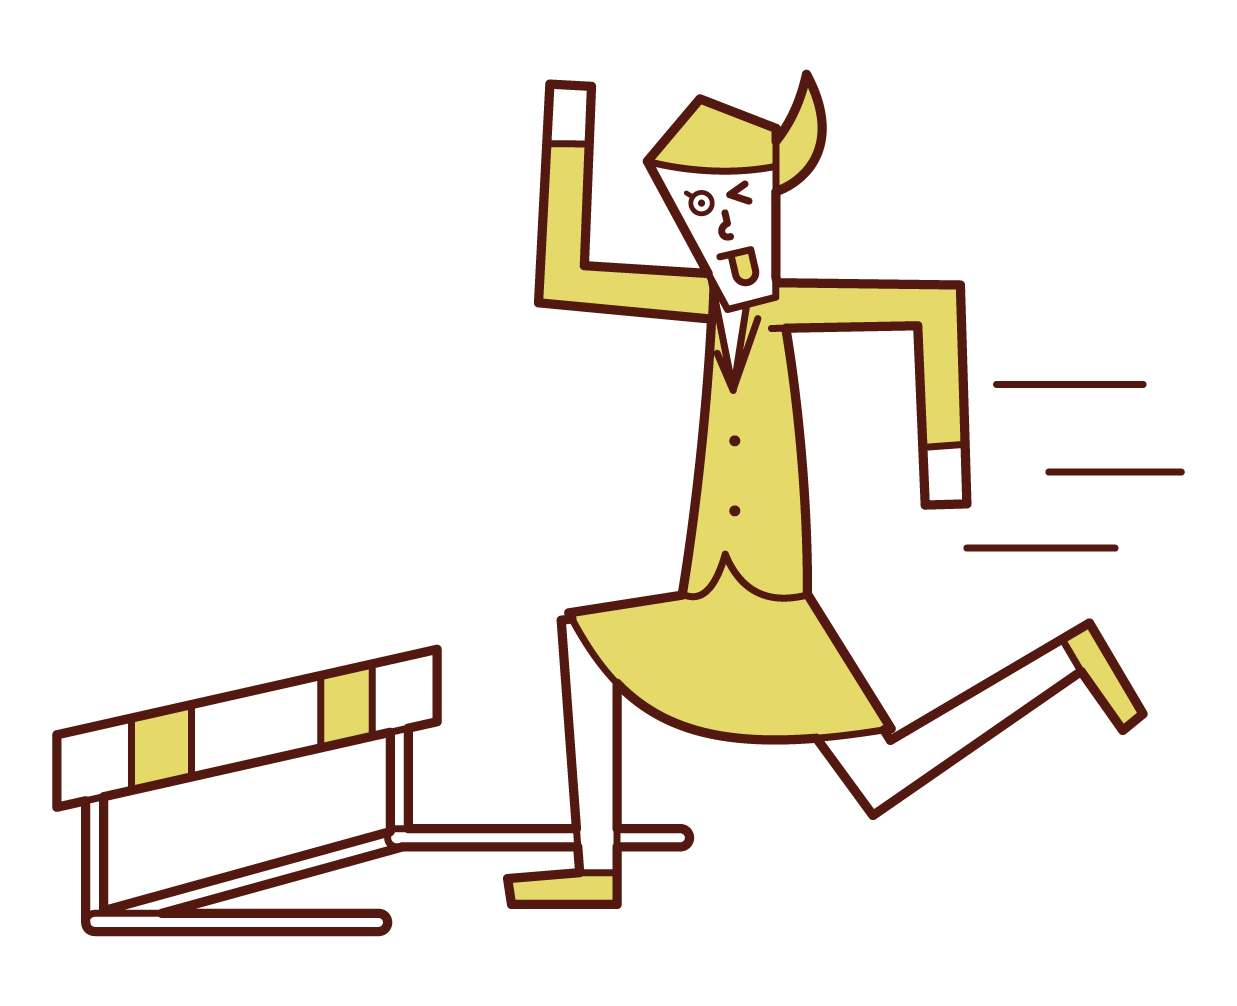 Illustration of a woman jumping over a low hurdle